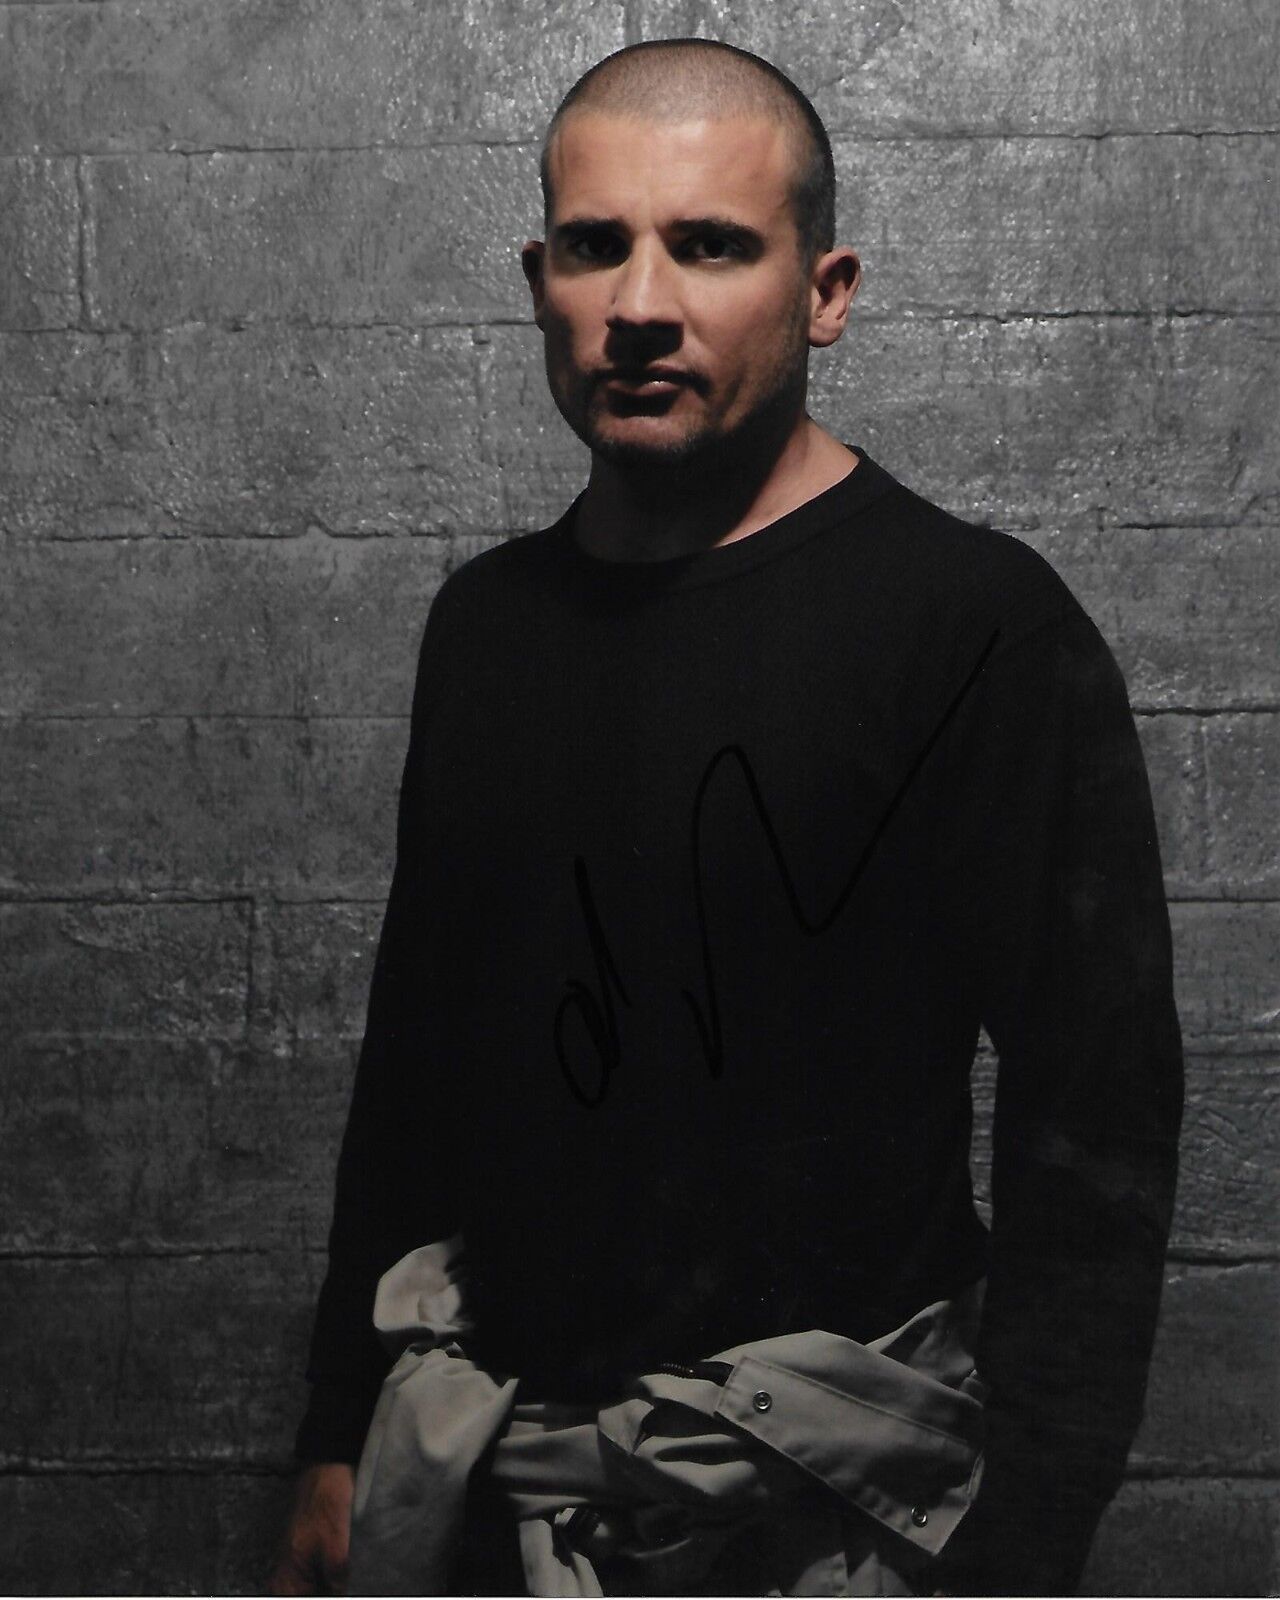 DOMINIC PURCELL PRISON BREAK AUTOGRAPHED Photo Poster painting SIGNED 8X10 #2 LINCOLN BURROWS